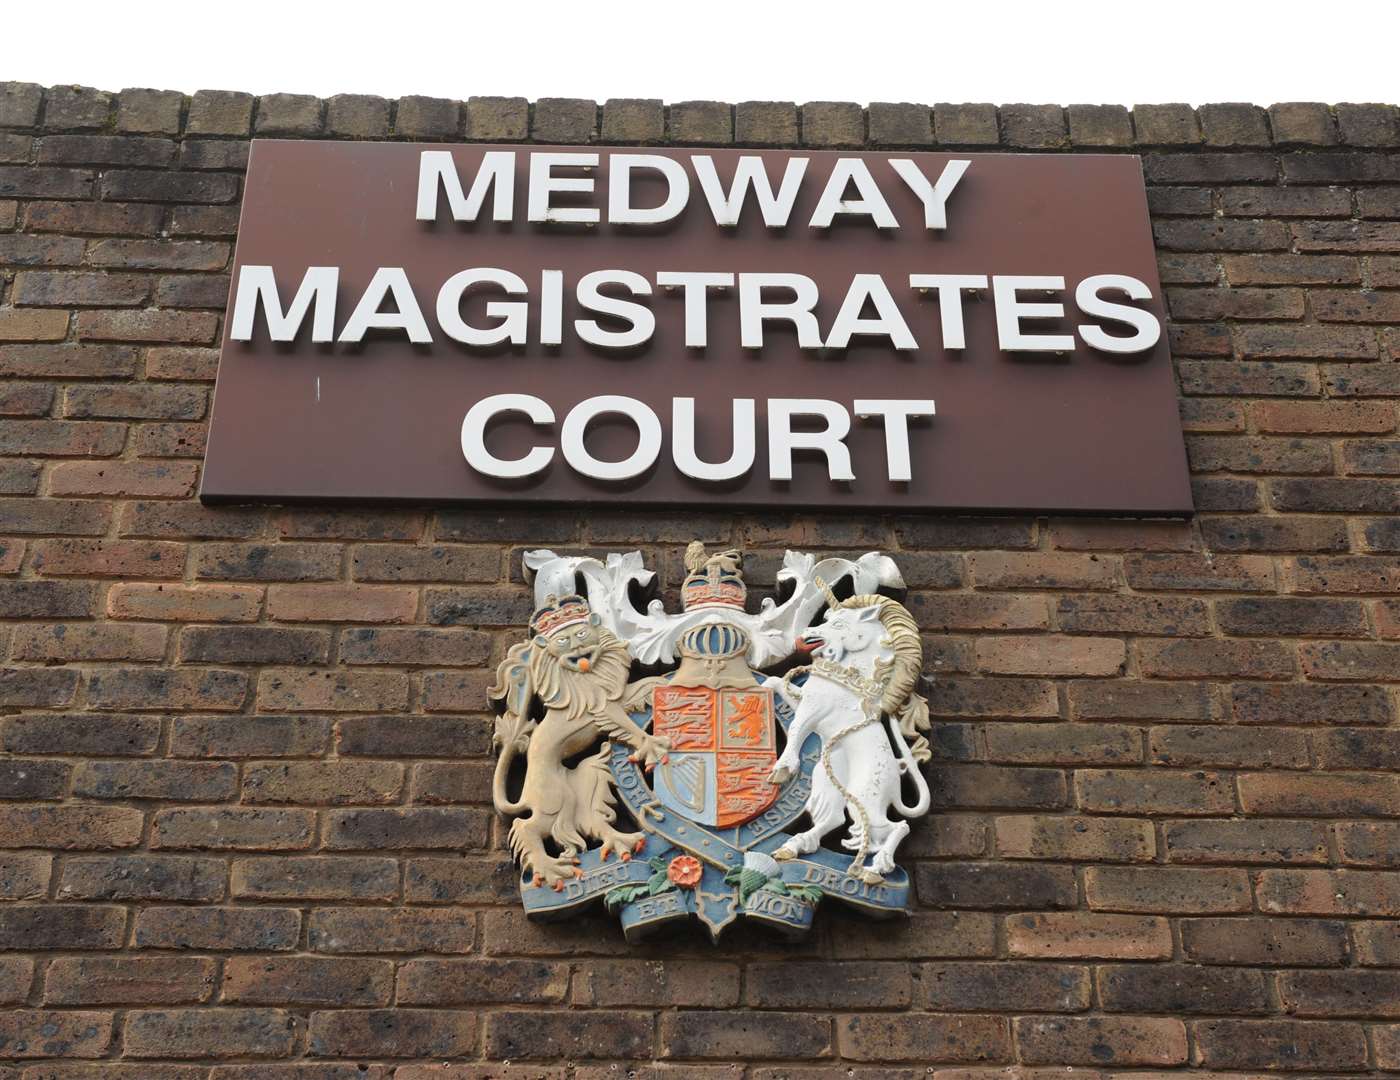 Robert Doughty was sentenced at Medway Magistrates' Court